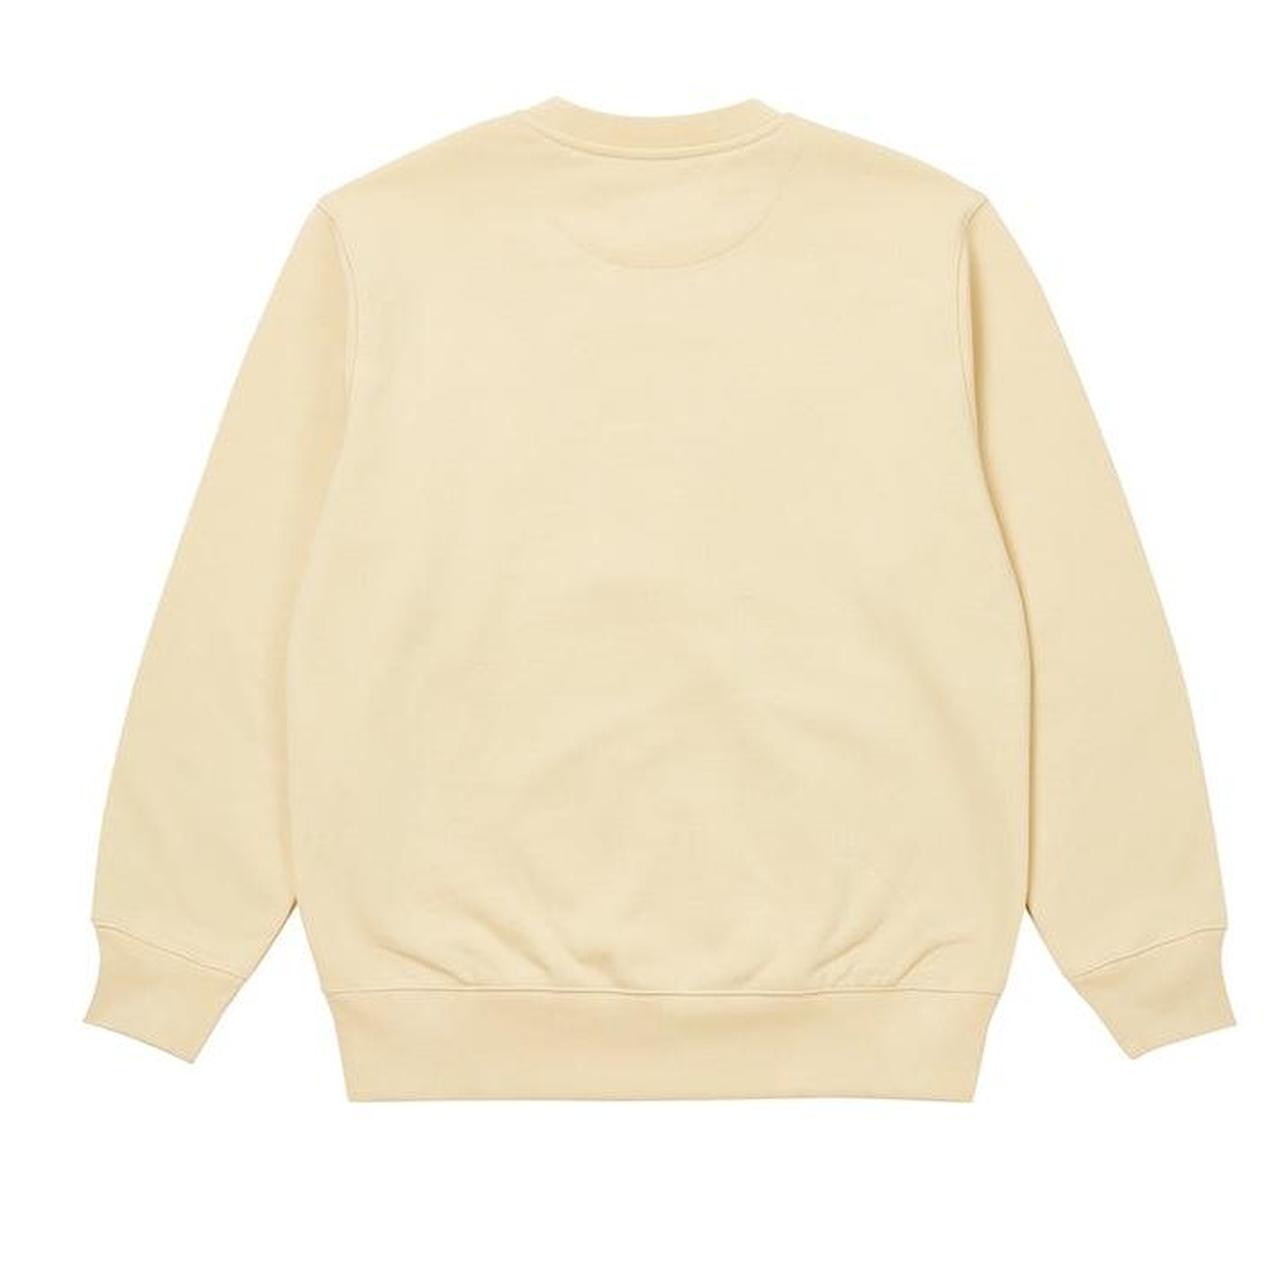 Palace Men's Cream and White Jumper (2)